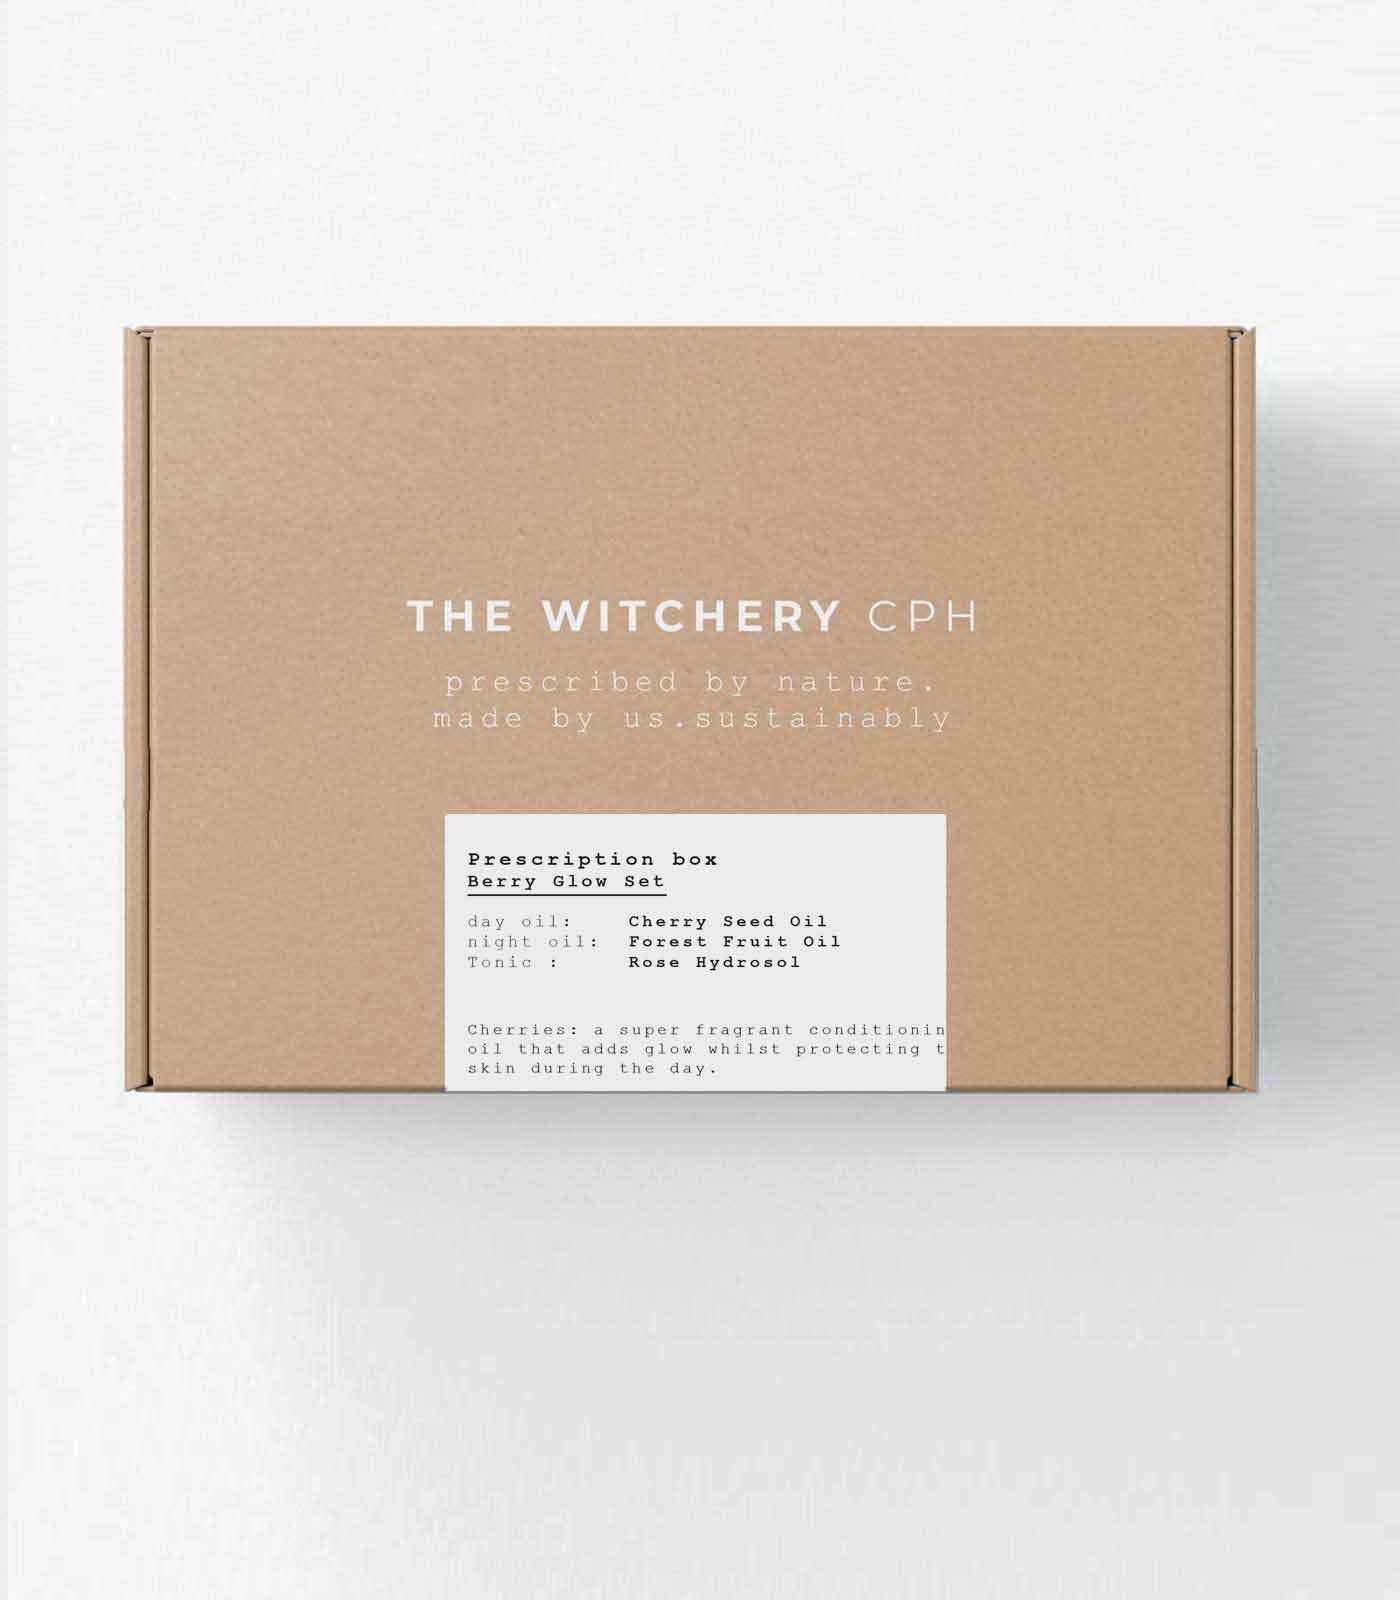 Berry Glow skin set for glowing skin - The Witchery CPH